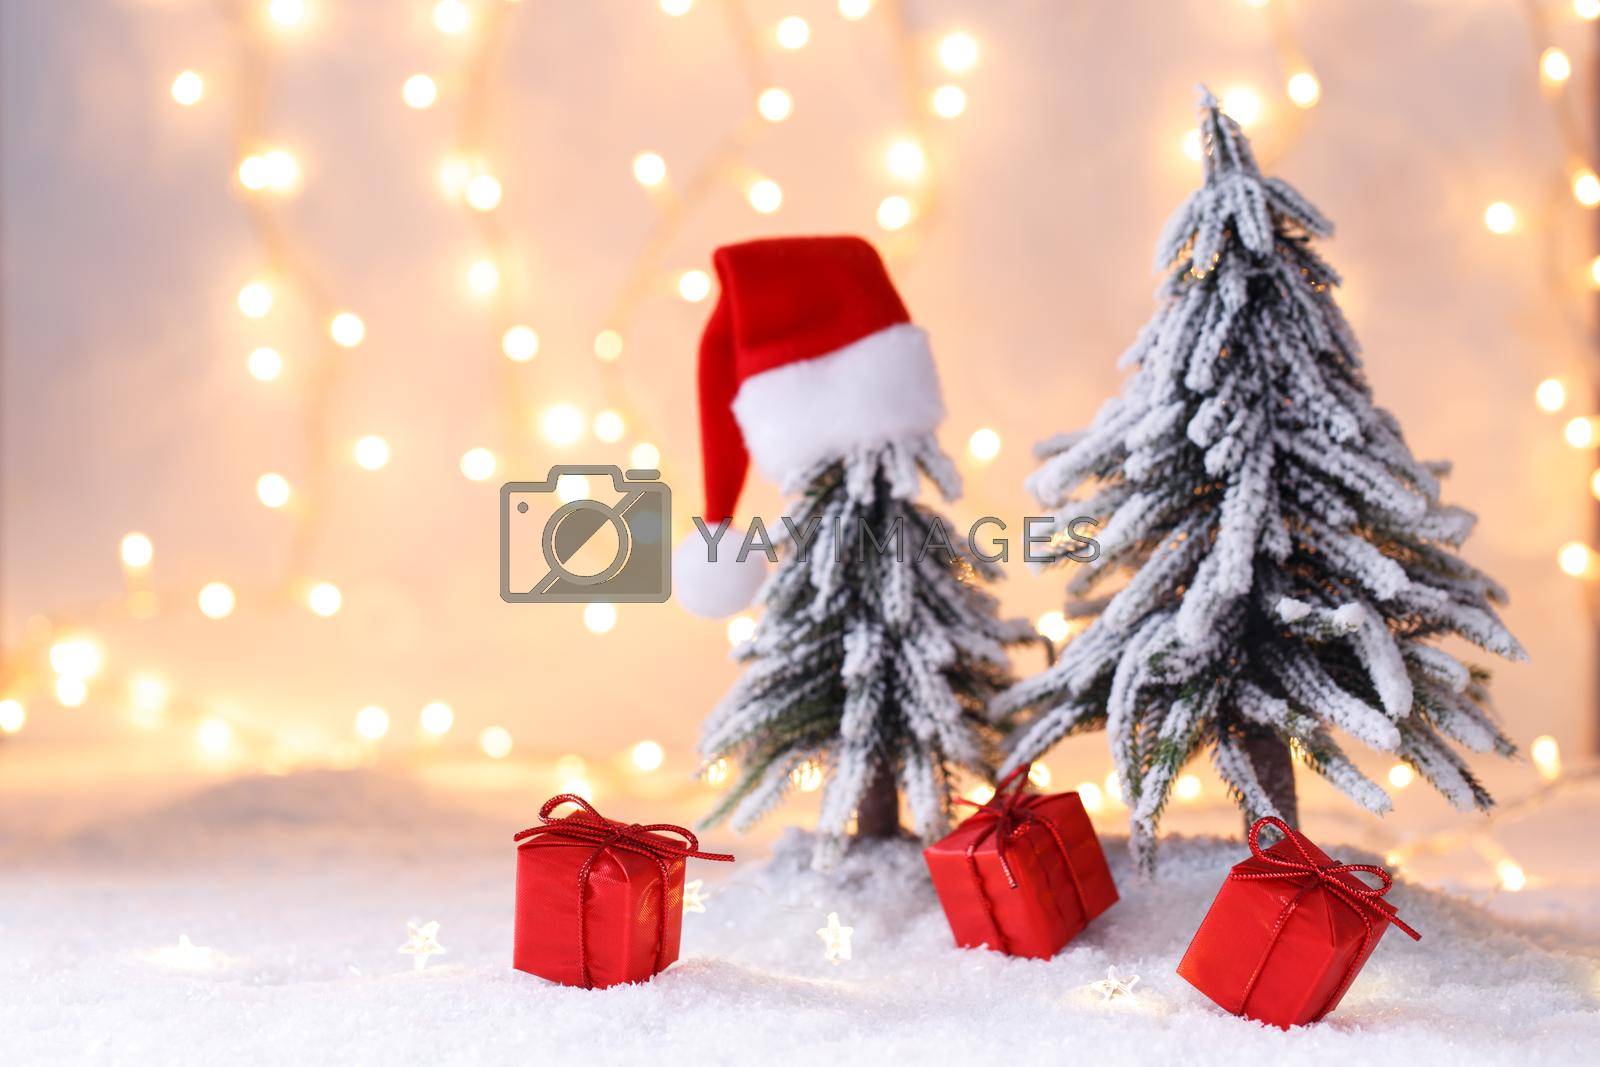 Royalty free image of Christmas or new year greeting card template by Lana_M